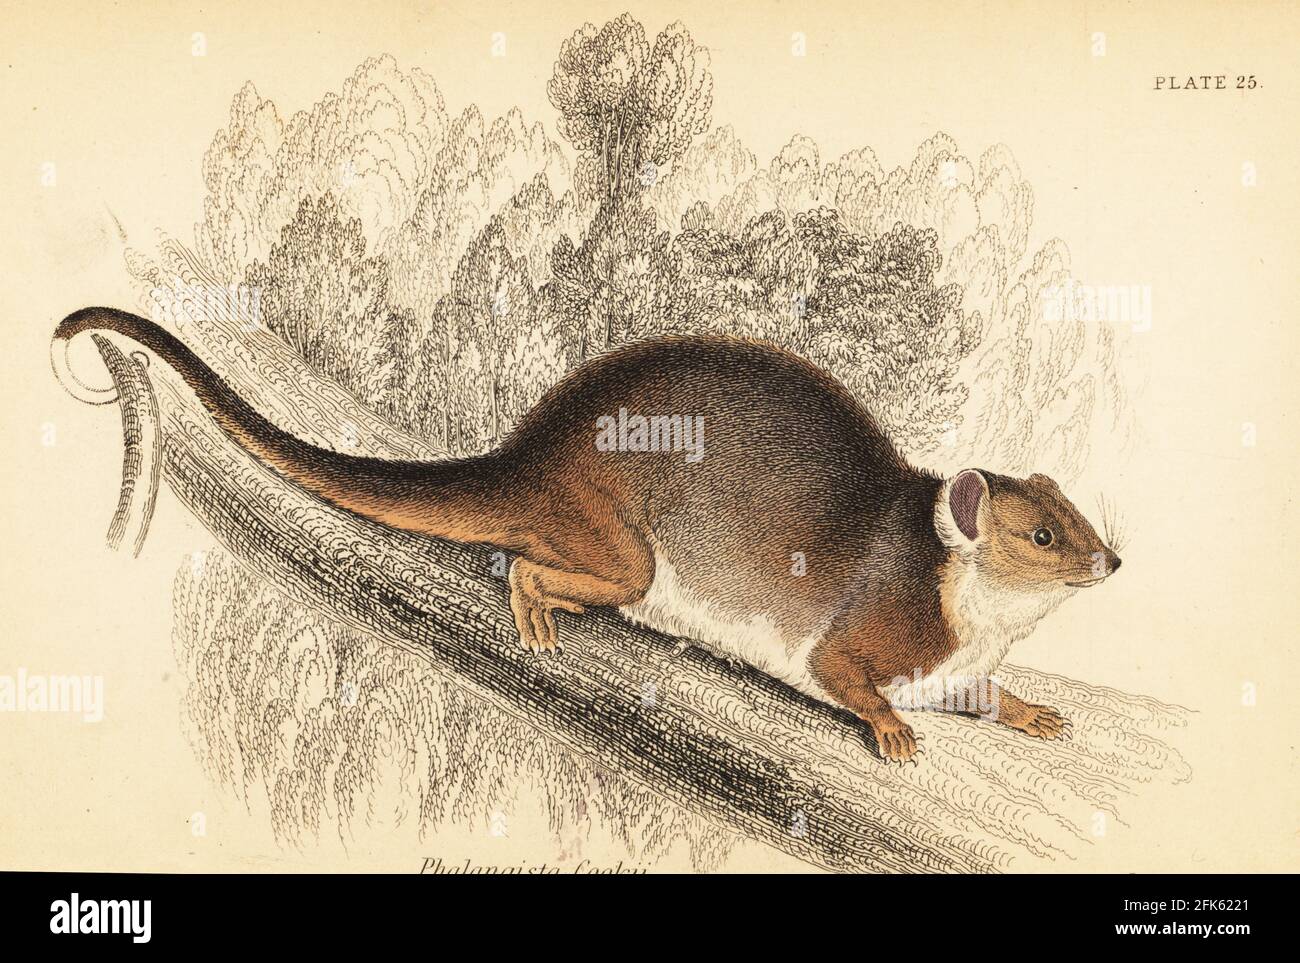 Common ringtail possum, Pseudocheirus peregrinus. Viverrine phalanger, Phalangista viverrina (Phalangista cookii on engraving). Handcoloured steel engraving by Lizars after an illustration by George Robert Waterhouse from his Marsupialia or Pouched Animals, Volume XI of the Naturalist’s Library, W. H. Lizars, Edinburgh, 1841. Waterhouse (1810-1888) was curator at the Zoological Society of London’s museum. Stock Photo